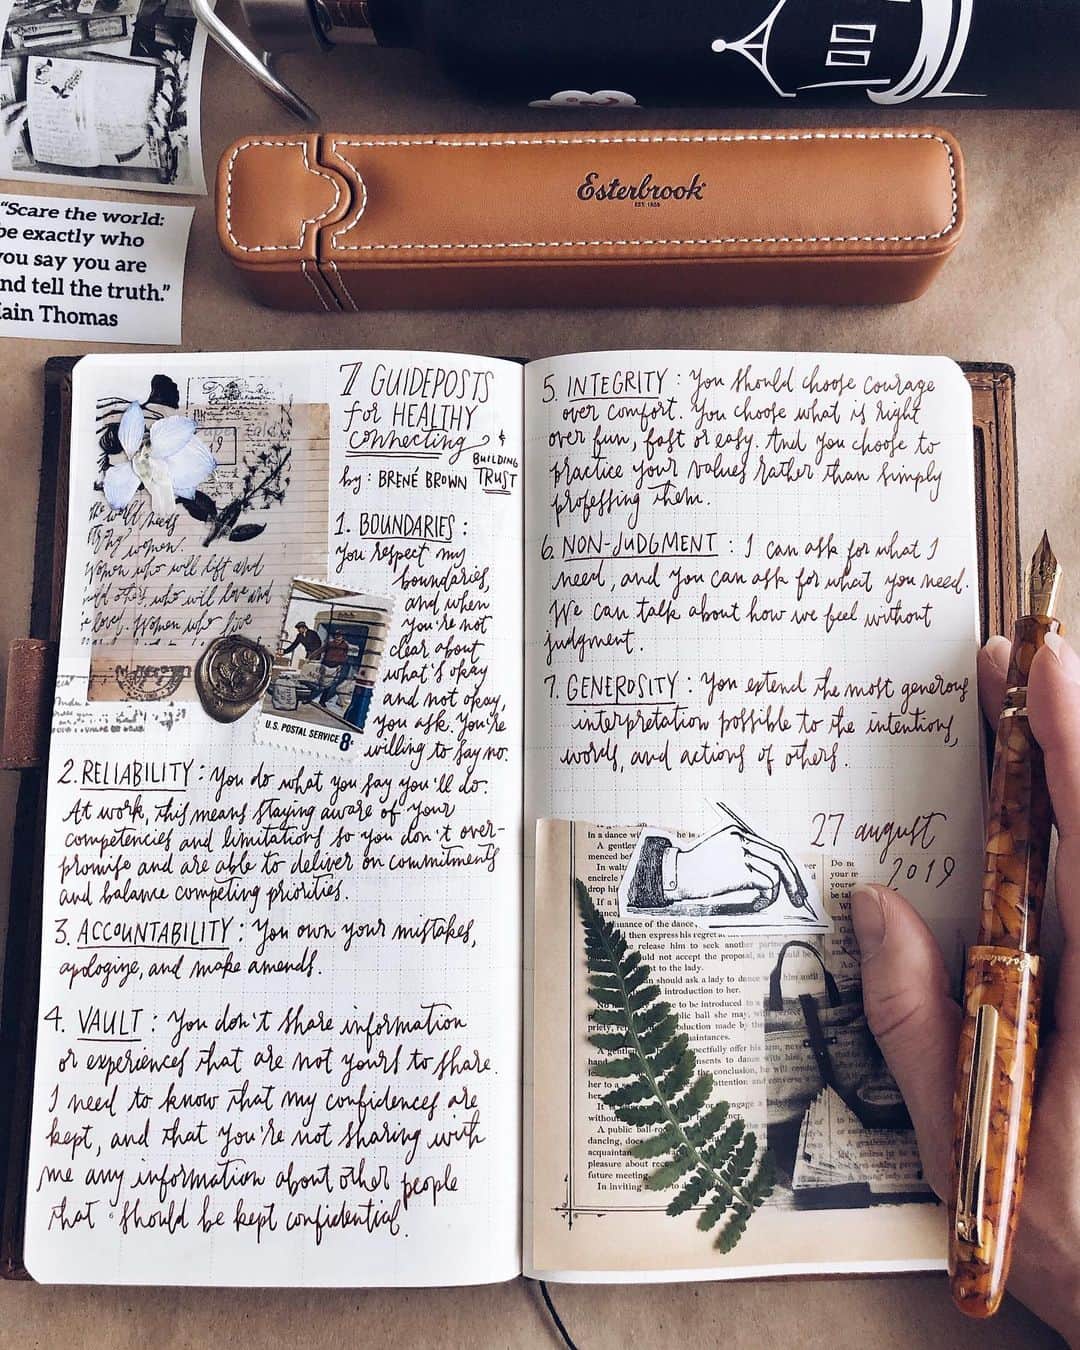 Catharine Mi-Sookさんのインスタグラム写真 - (Catharine Mi-SookInstagram)「I’m feeling really encouraged that I’ve finally found a #bulletjournal system that I can maintain! Hooray! Once or twice a week with a focus on wholeness and well-being. Today’s list is by Brené Brown and is a favorite of mine. I find it to be a great litmus test and reminder with regards to how we communicate with our close ones. I’m really looking forward in being able to use this as a resource for the days ahead when I need helpful reminders that match my goals and values! 🙌🏼 . . And on the subject of new practices, I’m really excited (understatement) to introduce the original @paperangprint P1 Printer! It is portable, thermal-based (which means no ink cartridges or refills, no waste, and cost effective) and easy to use! They offer a variety of paper options and I chose the semi-transparent sticker roll, white sticker roll and of course the white paper roll that comes with the printer. Can we say scrapbooking game changer?! Now I can print my own vintage-theme ephemera, stickers and even photo prints! I can’t wait to experiment and play around with this more. A big thank you to the kind folks at @paperangprint for sending this portable printer and paper for me to try out! Later this week I’ll be sharing a process video of how it all works from changing paper, using the @paperangprint app, customizing and printing your own ephemera! For those who cannot wait, they’re having an awesome back to school sale that ends tomorrow. . . Also for those who asked- there are still complimentary water bottles available at @penchalet with an Estie Honeycomb Pen order but you need to use the link in my bio so that you get the water bottle! First time orders get a discount when you sign up on their mailing list too! . . So on another note, who is ready for fall and who is holding onto summer? I love both seasons but summer always seems to fly by. . . #journaling #scrapbooking #paperang #paperangprinter #soumkine #esterbrook #fountainpens #stationeryaddict #stationerylove #travelerscompany #トラベラーズノート #midoritravelersnotebook #pegandawl #flatlaystyle #flatlays #monteverde #fountainpenink #scrapbooklayout #junkjournal #brenebrown #penmanship #ephemera #thedailywriting」8月28日 4時36分 - catharinemisook